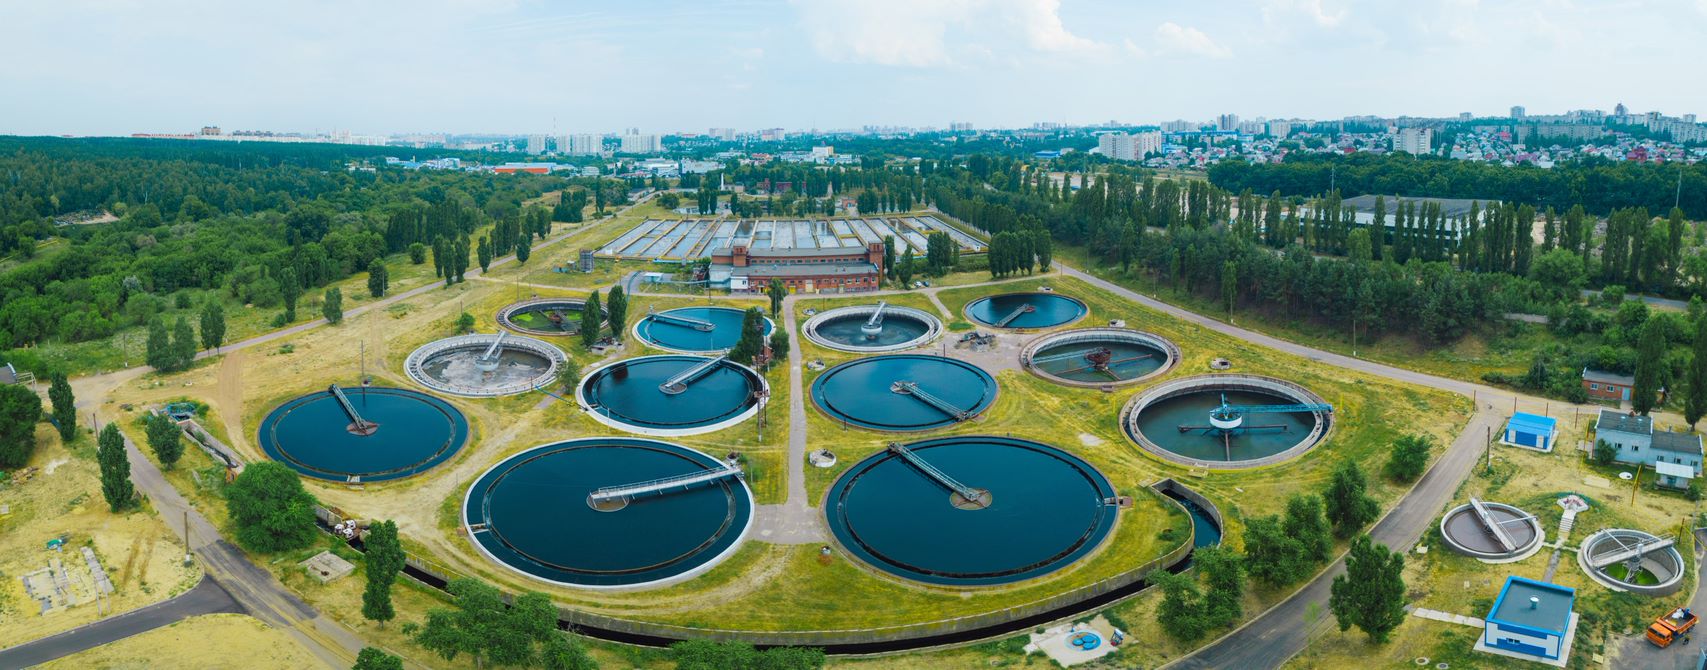 Large water utilities site with 12 reservoirs for treatment of water at different stages